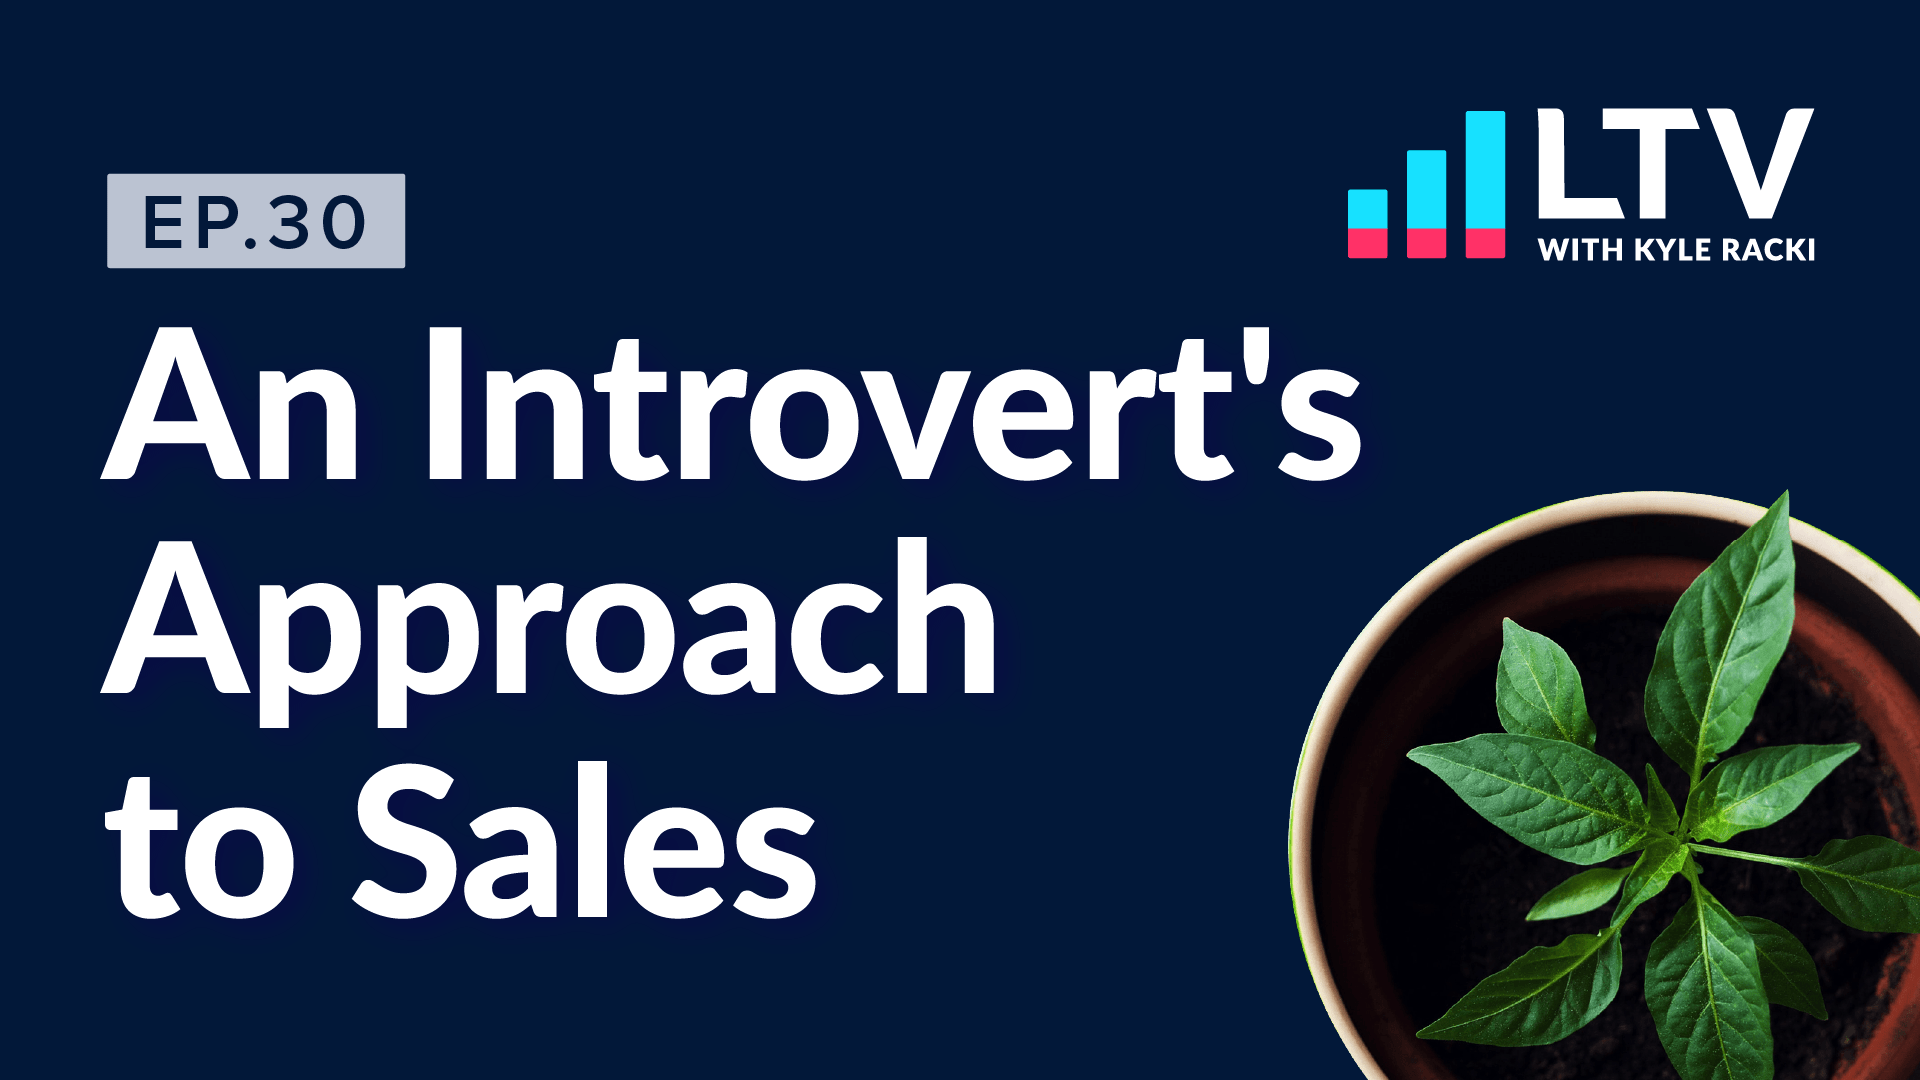 LTV Podcast Episode 30: An Introvert's Approach to Sales